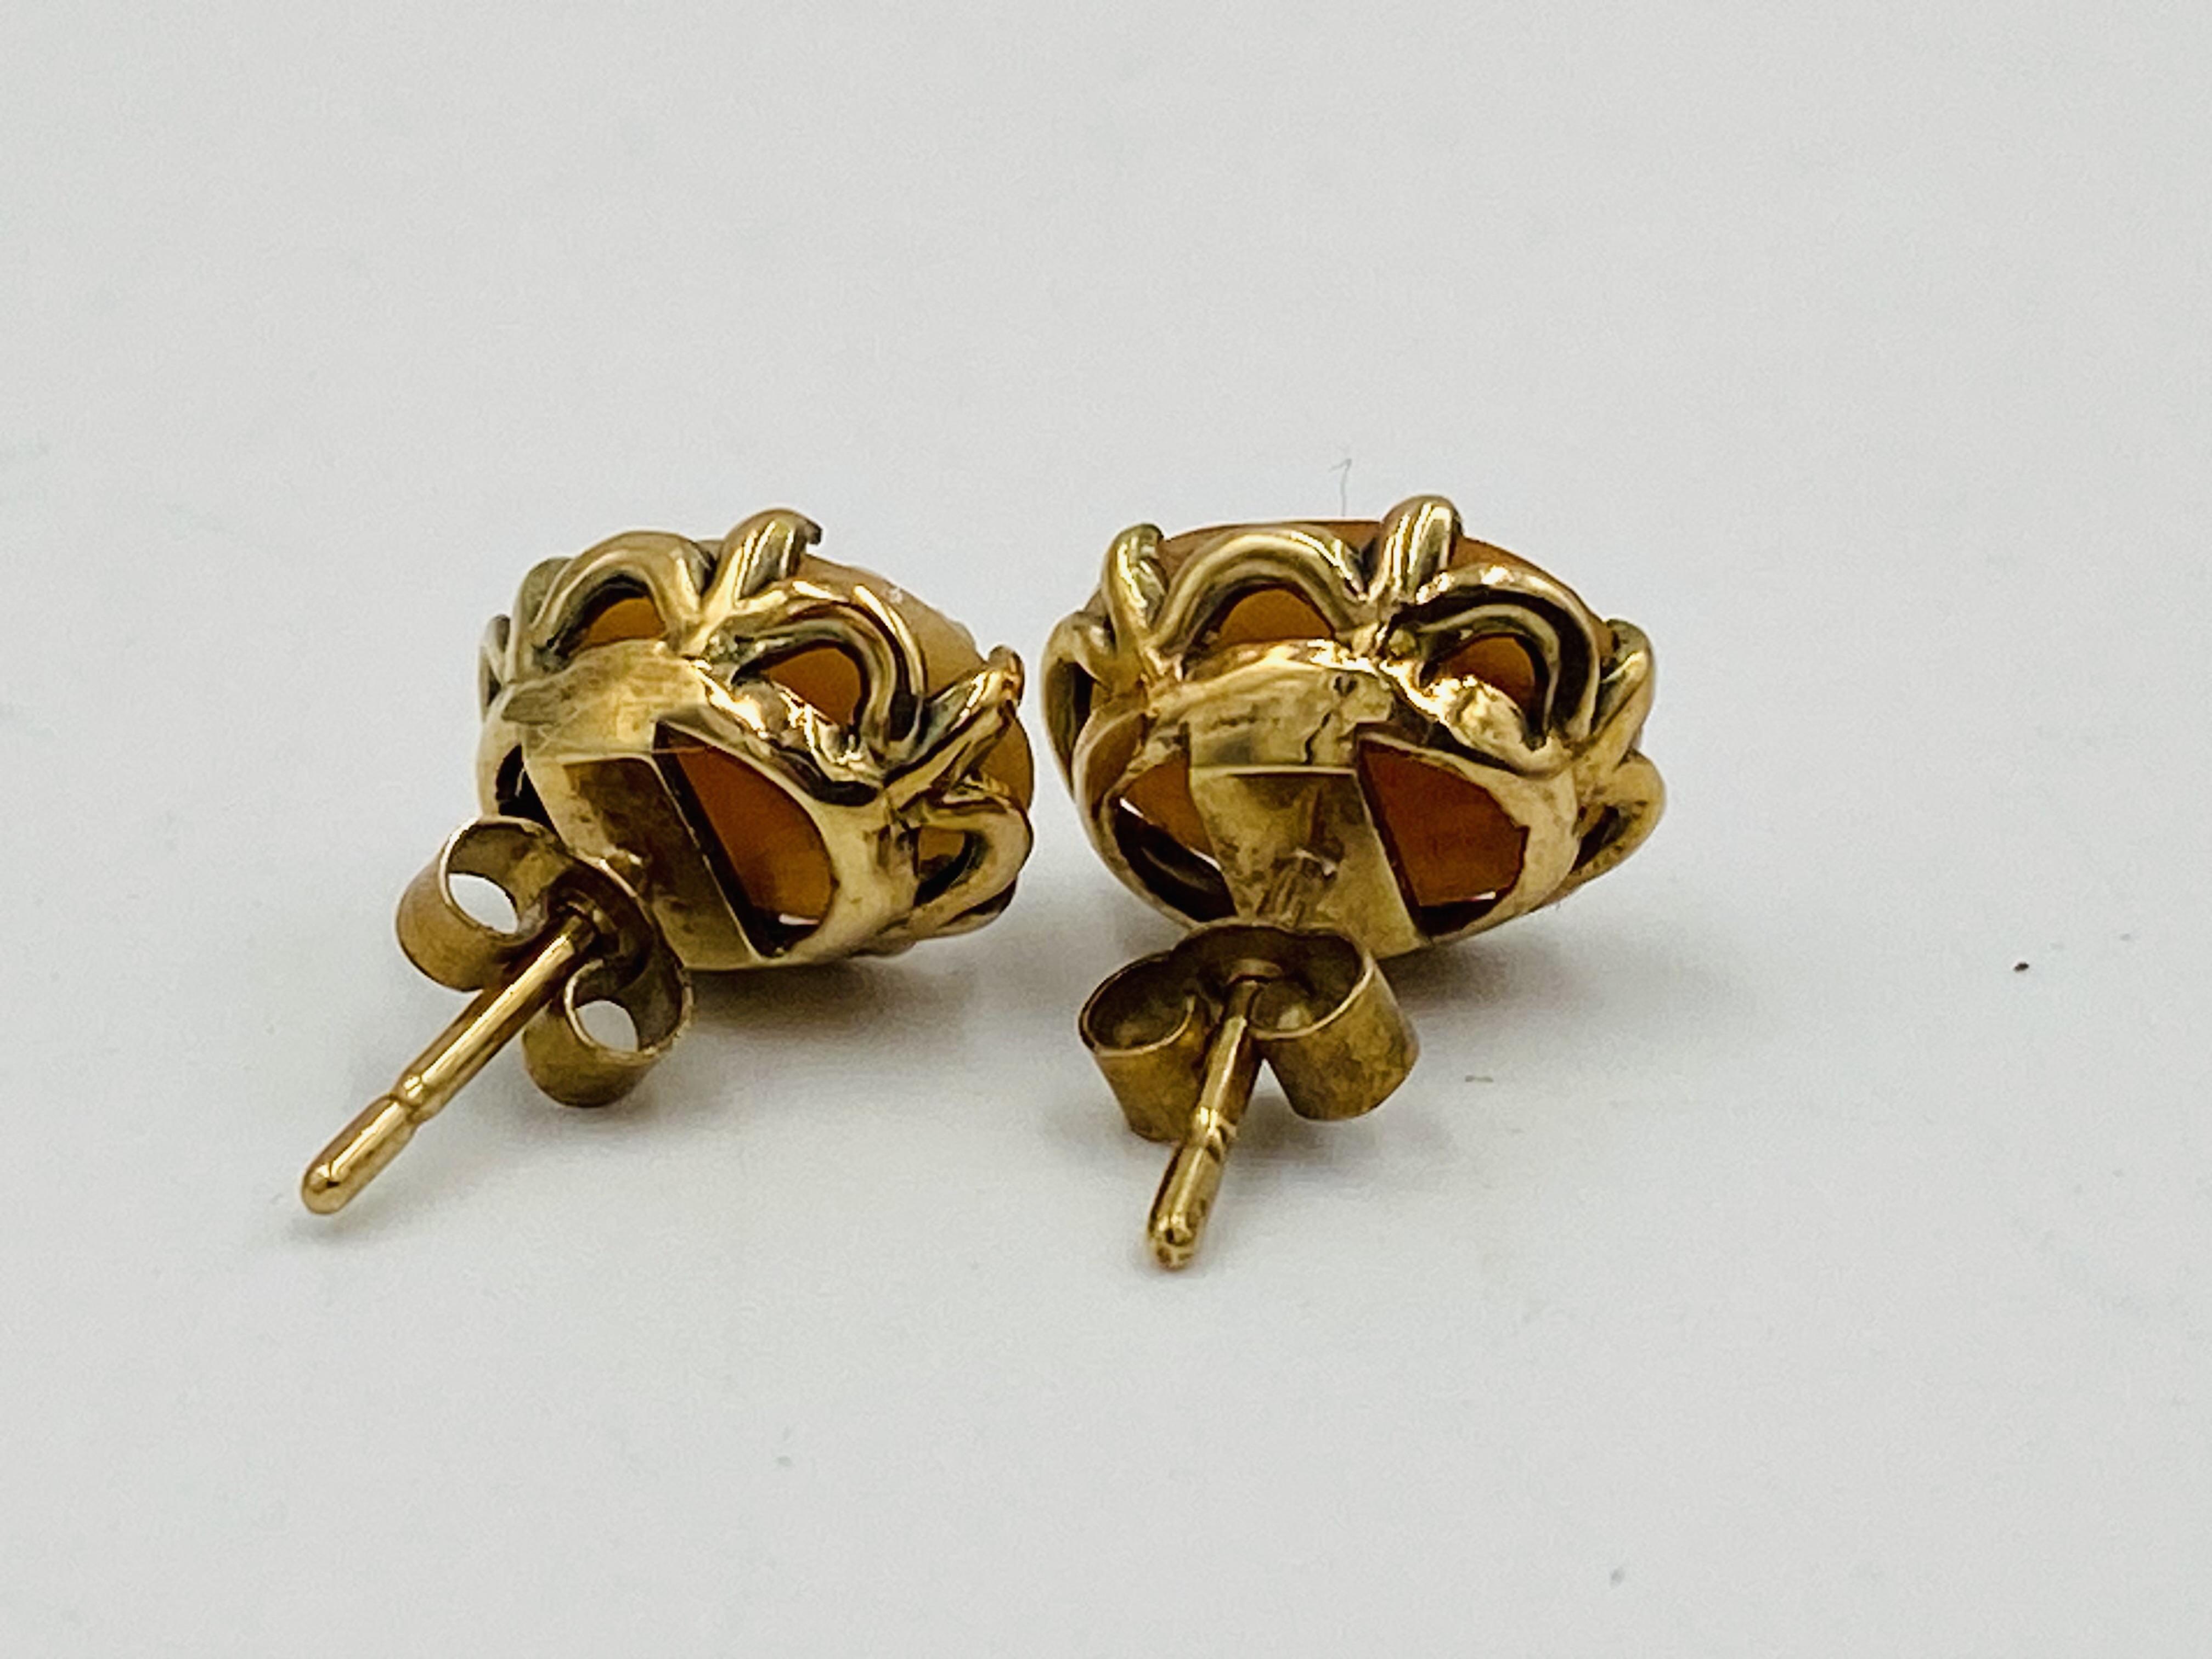 Pair of 9ct gold cameo earrings - Image 2 of 3